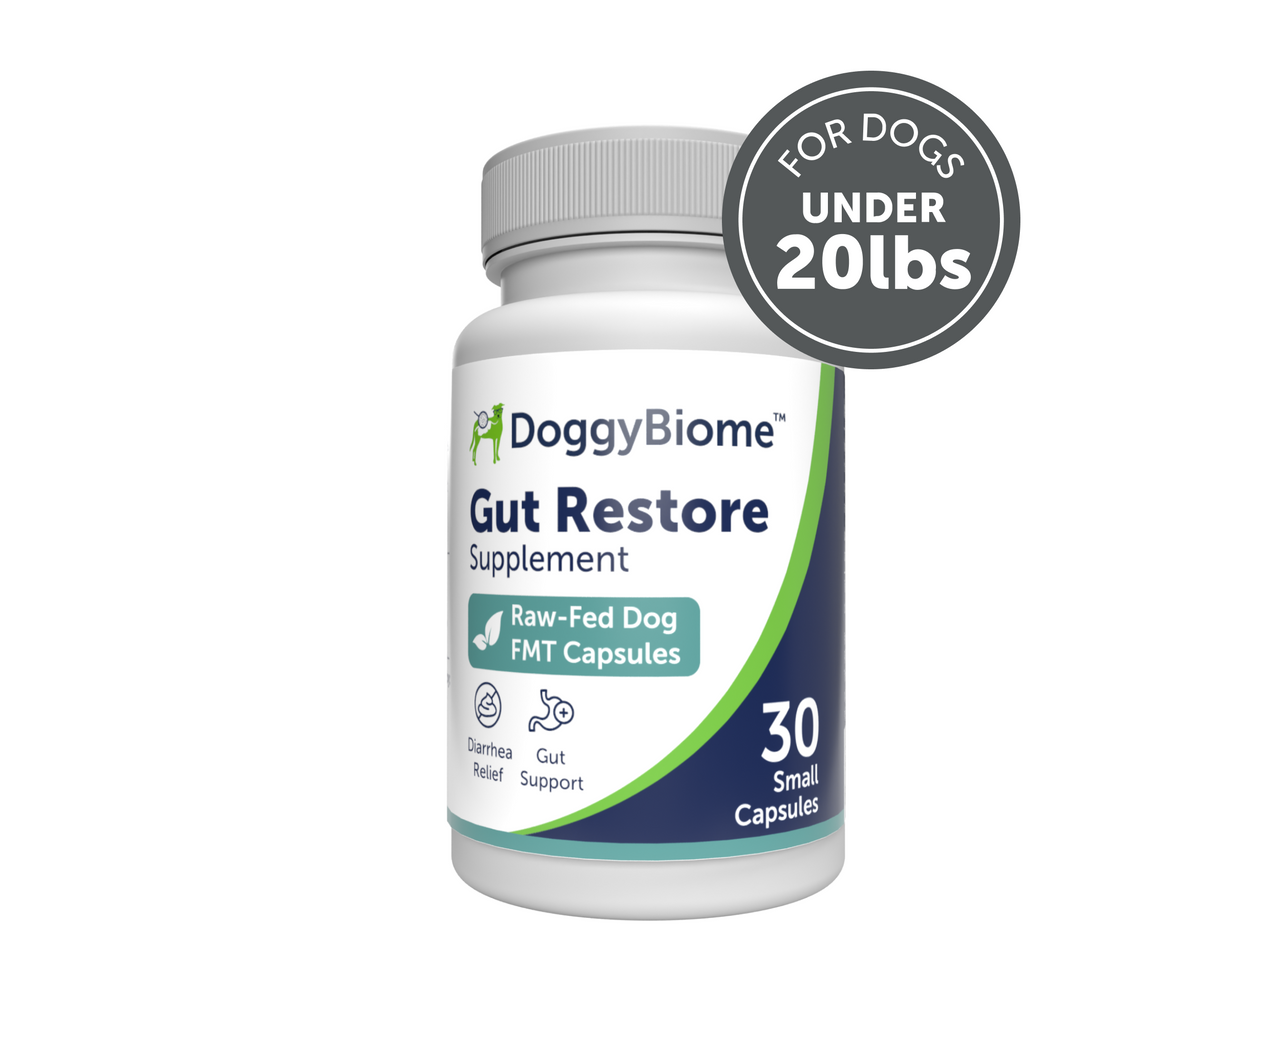 DoggyBiome™ Gut Restore Supplement from Raw-Fed Dogs